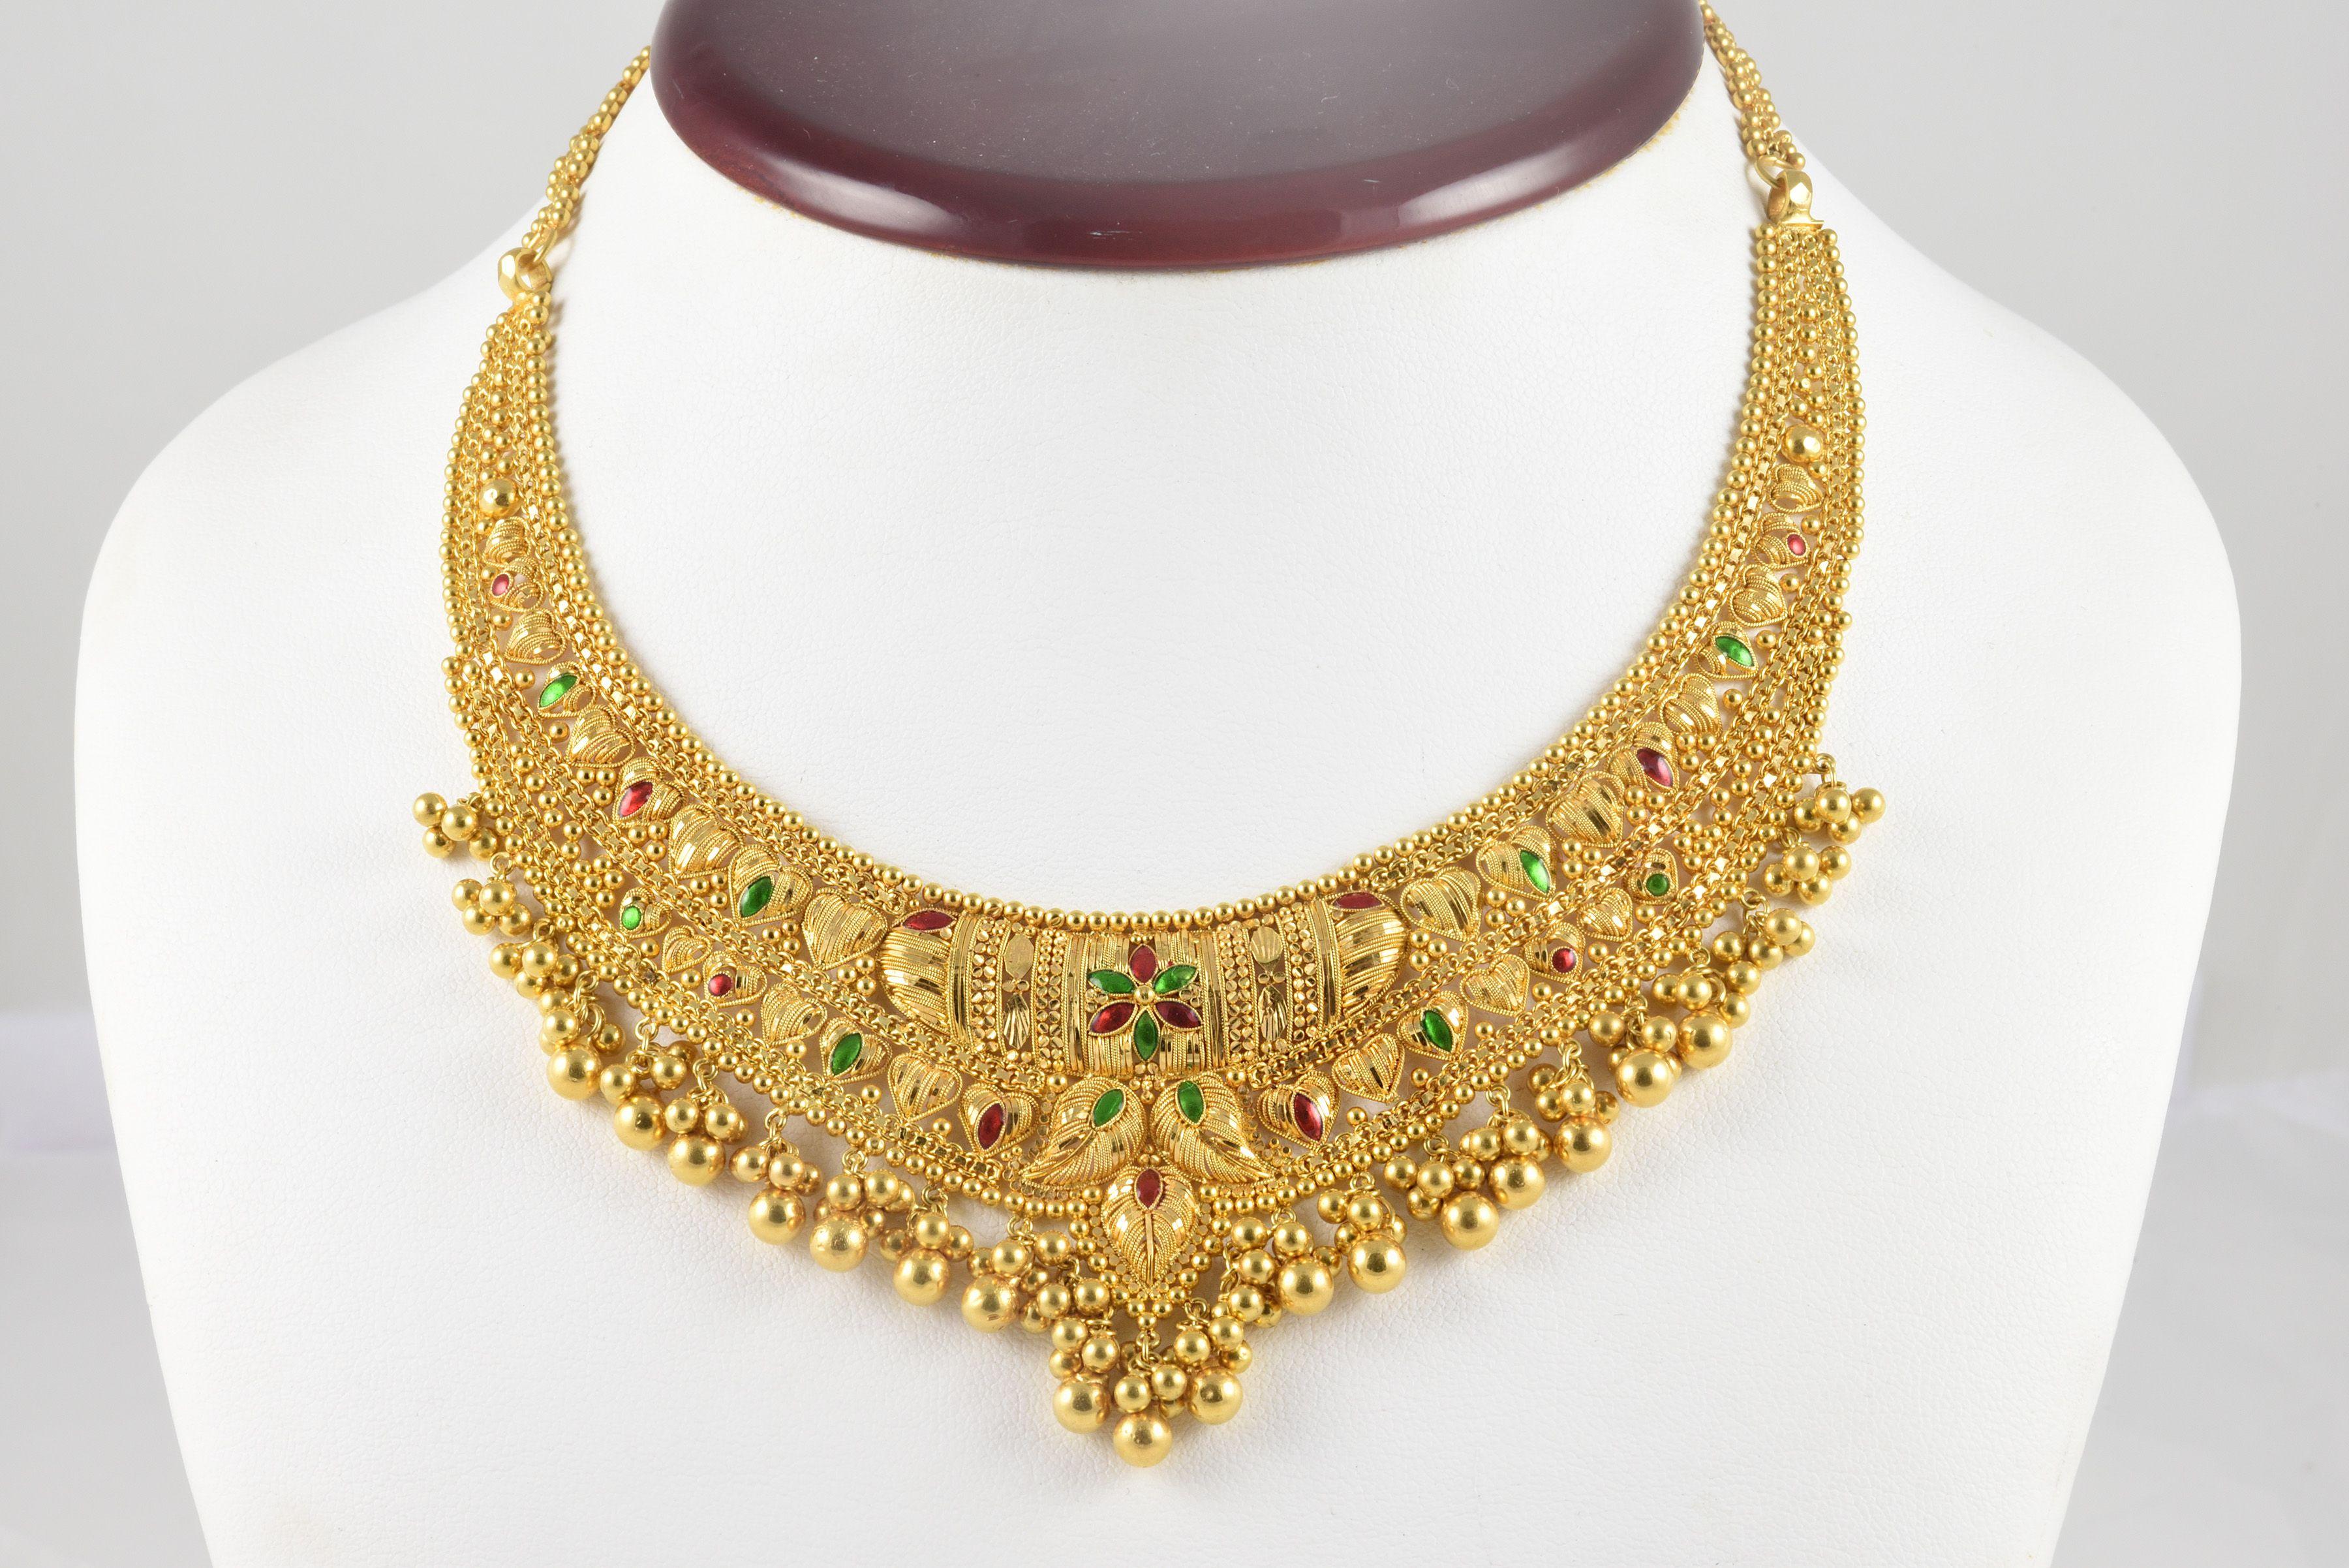 Estate Indian 20kt yellow gold bib necklace embellished with red and blue enamel and gold fringe. 